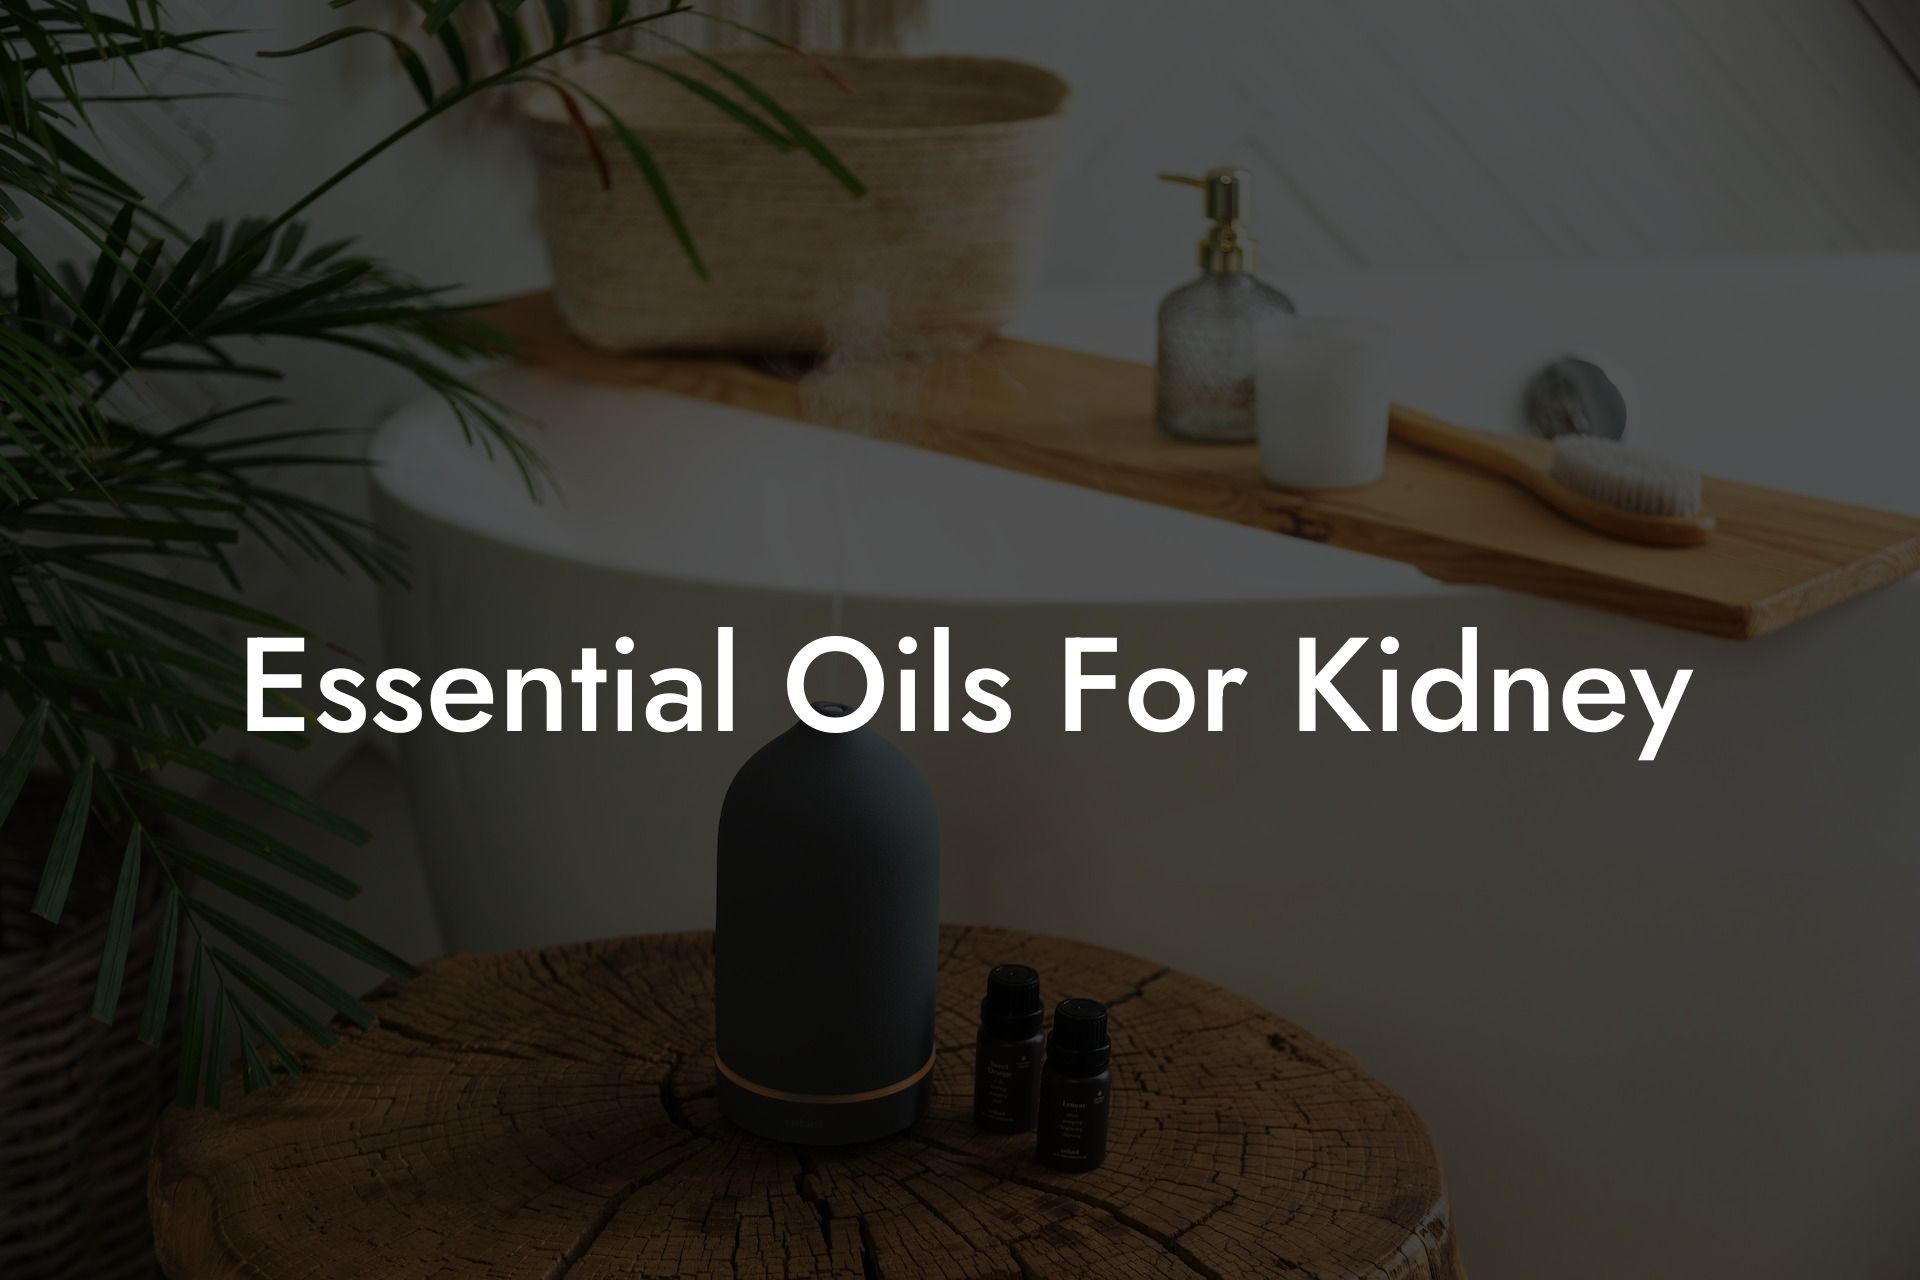 Essential Oils For Kidney